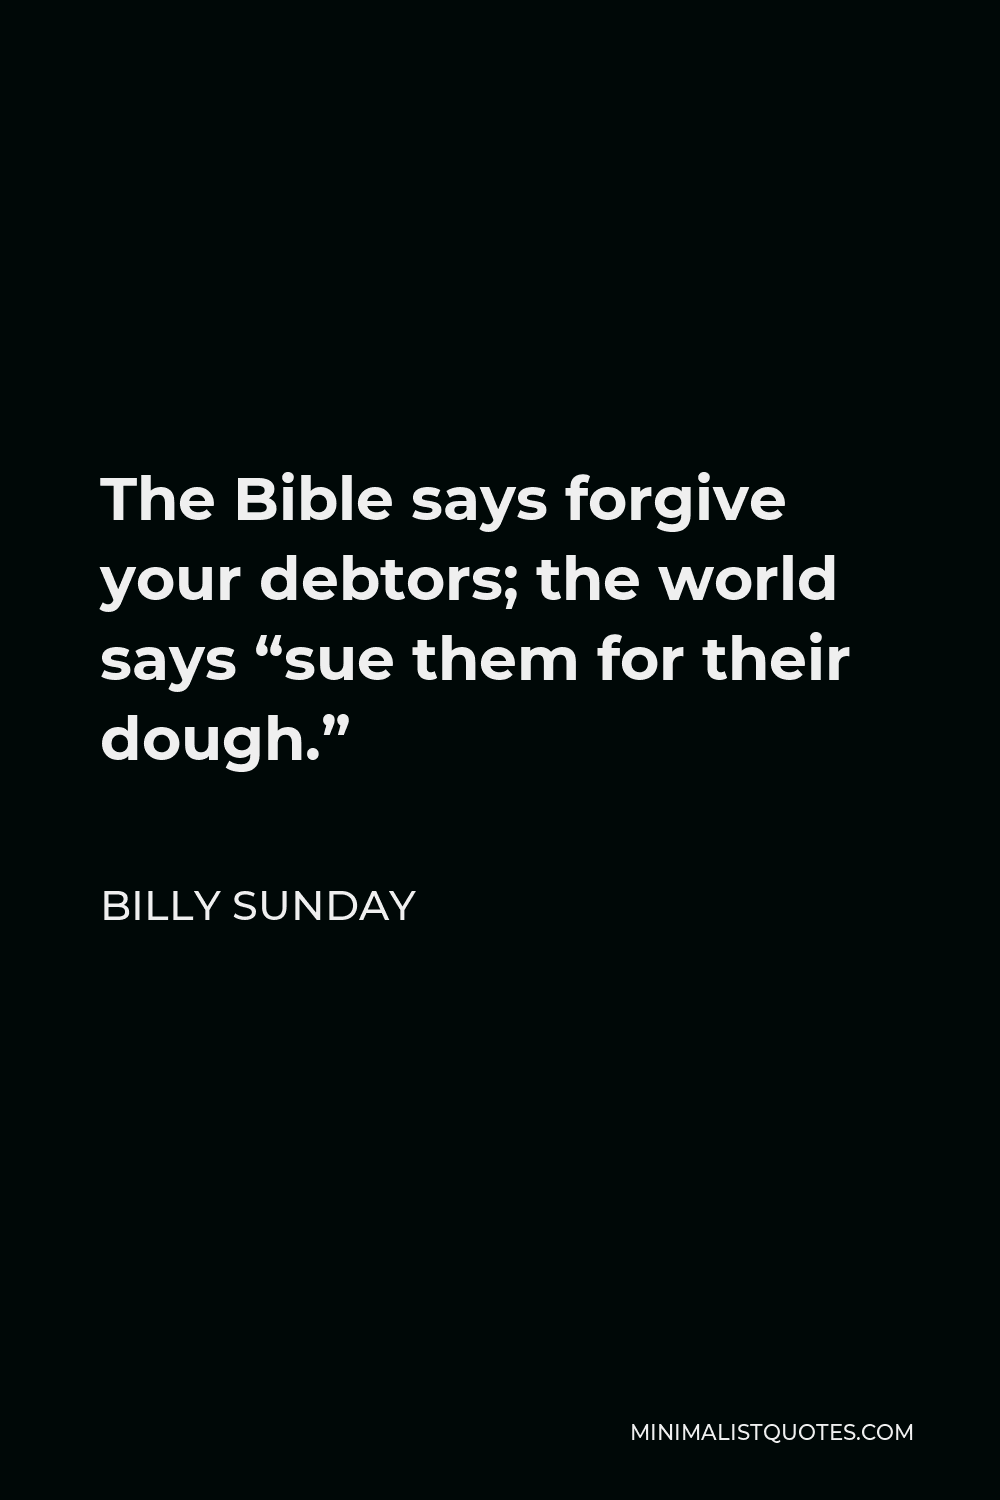 Billy Sunday Quote - The Bible says forgive your debtors; the world says “sue them for their dough.”